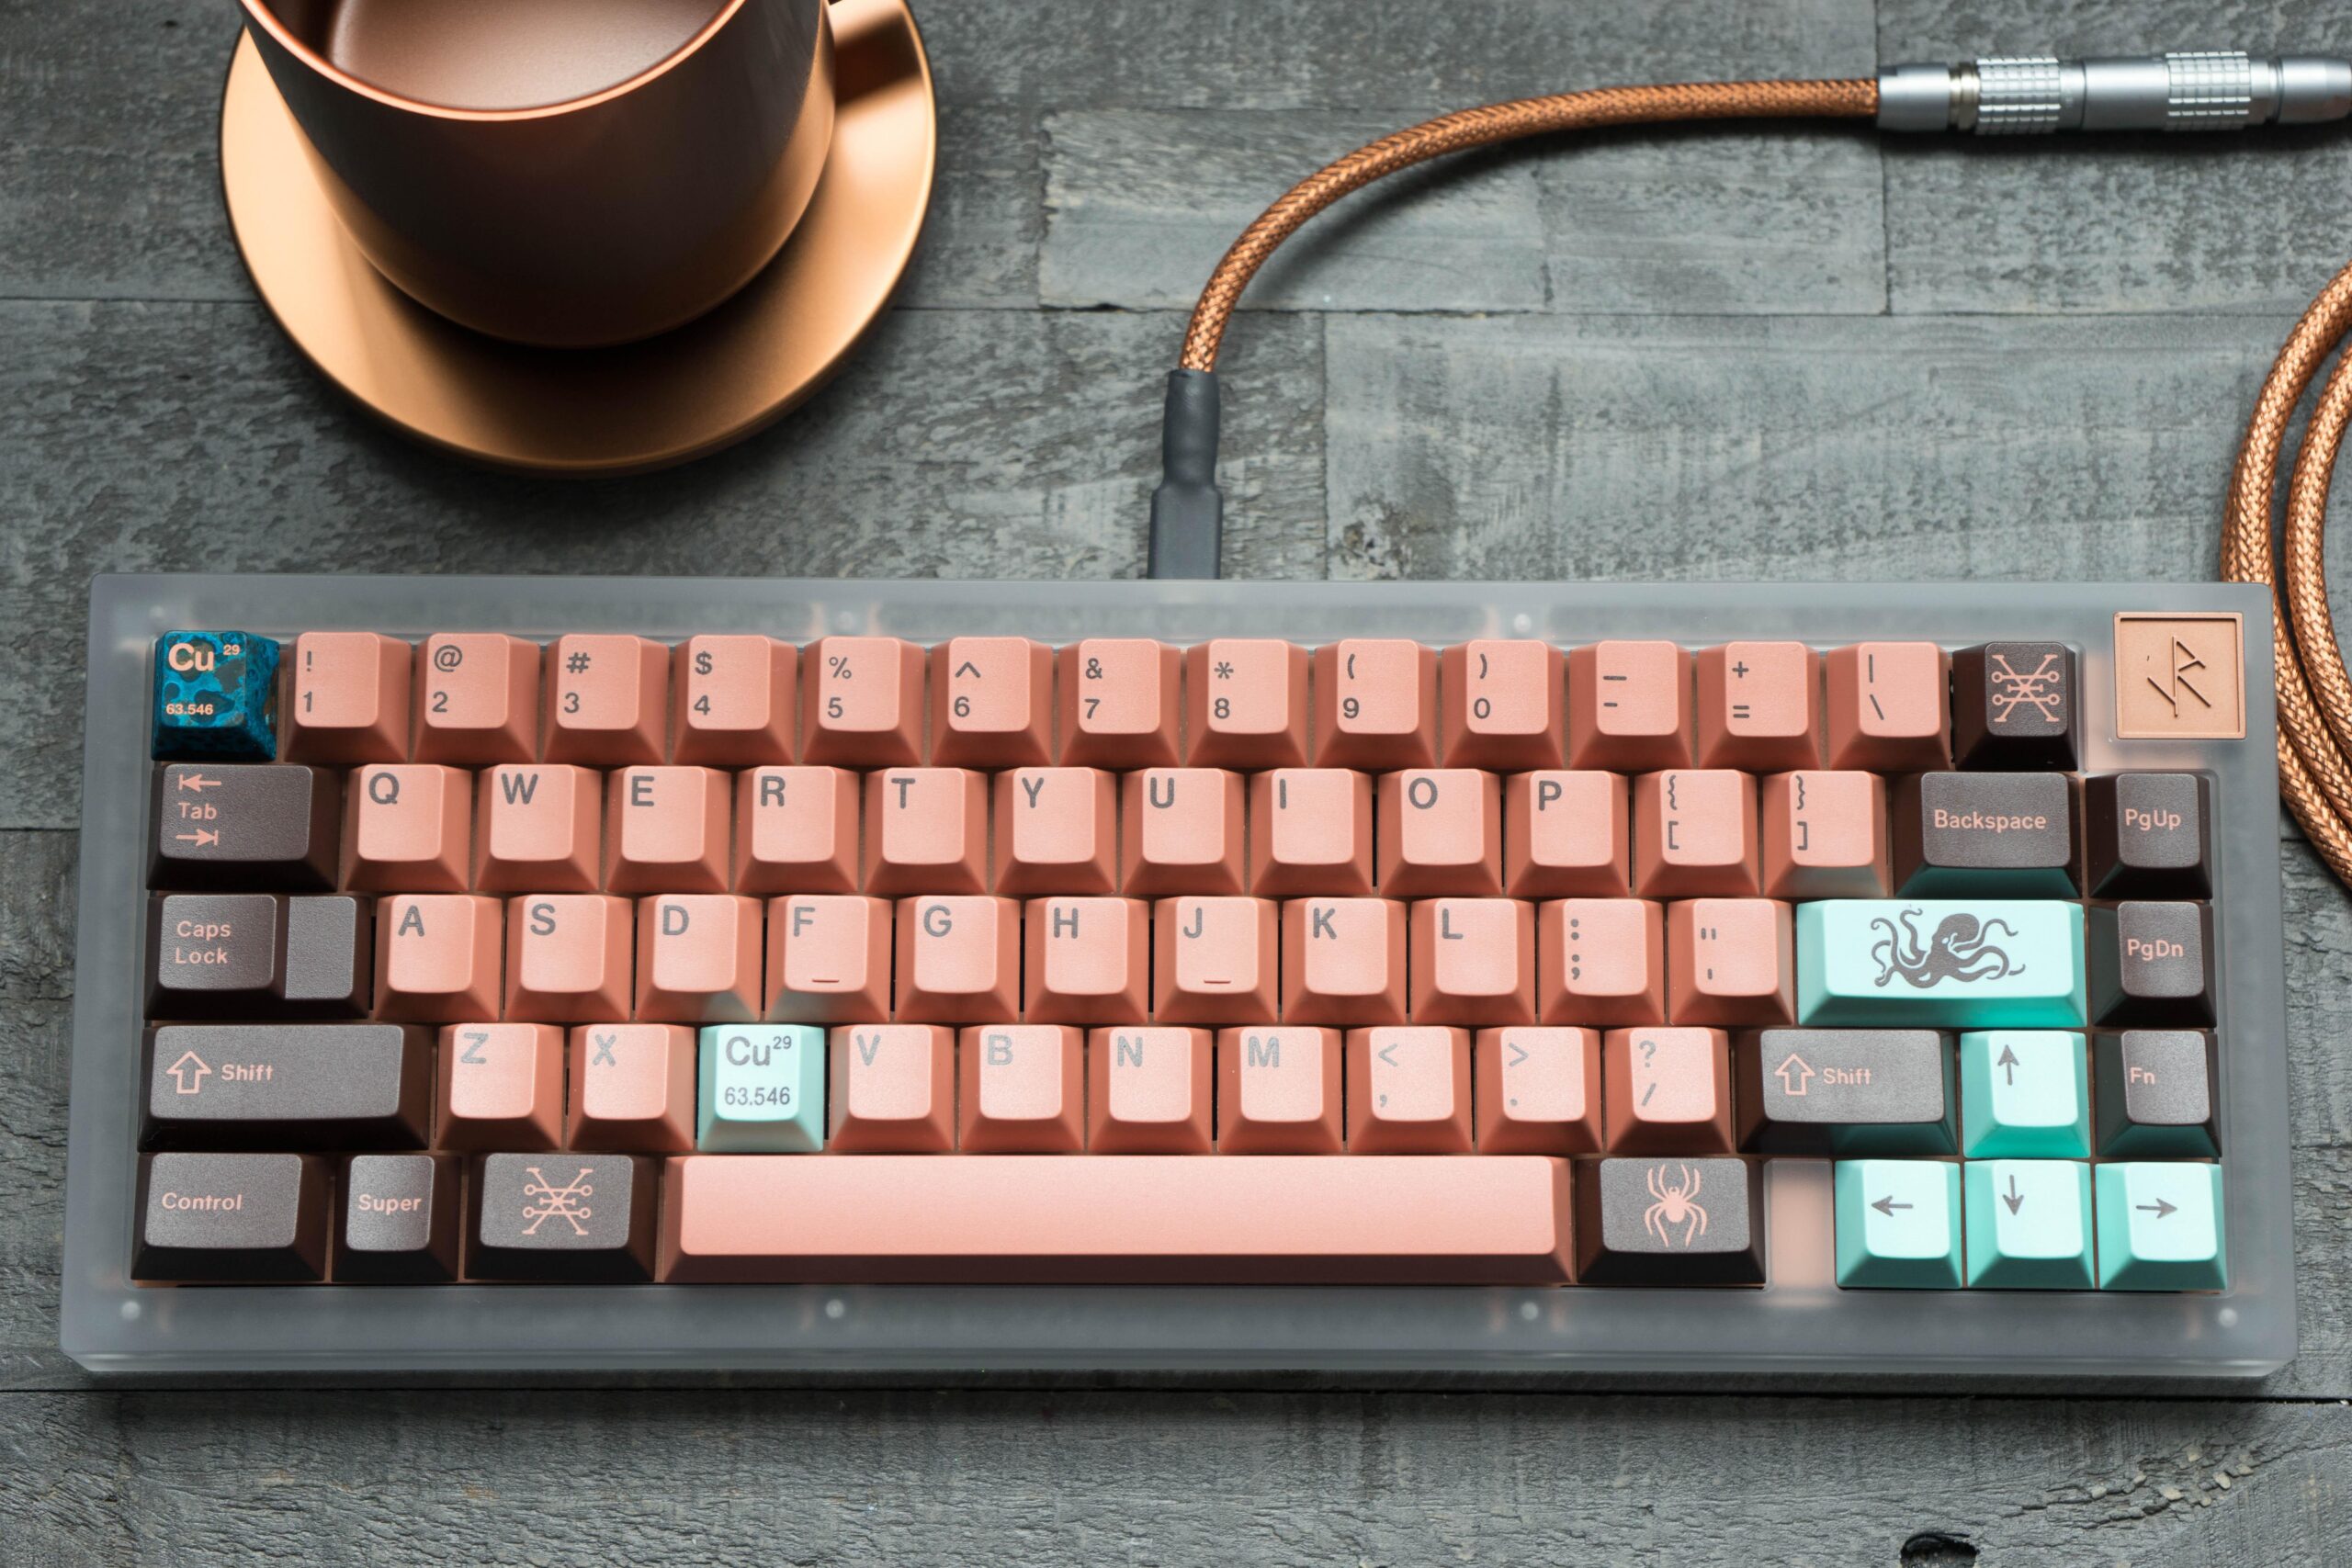 Copper Keycaps set keyboard with teal, pastel pink and gray tones. Nice usb custom cable and other matching elements on the table